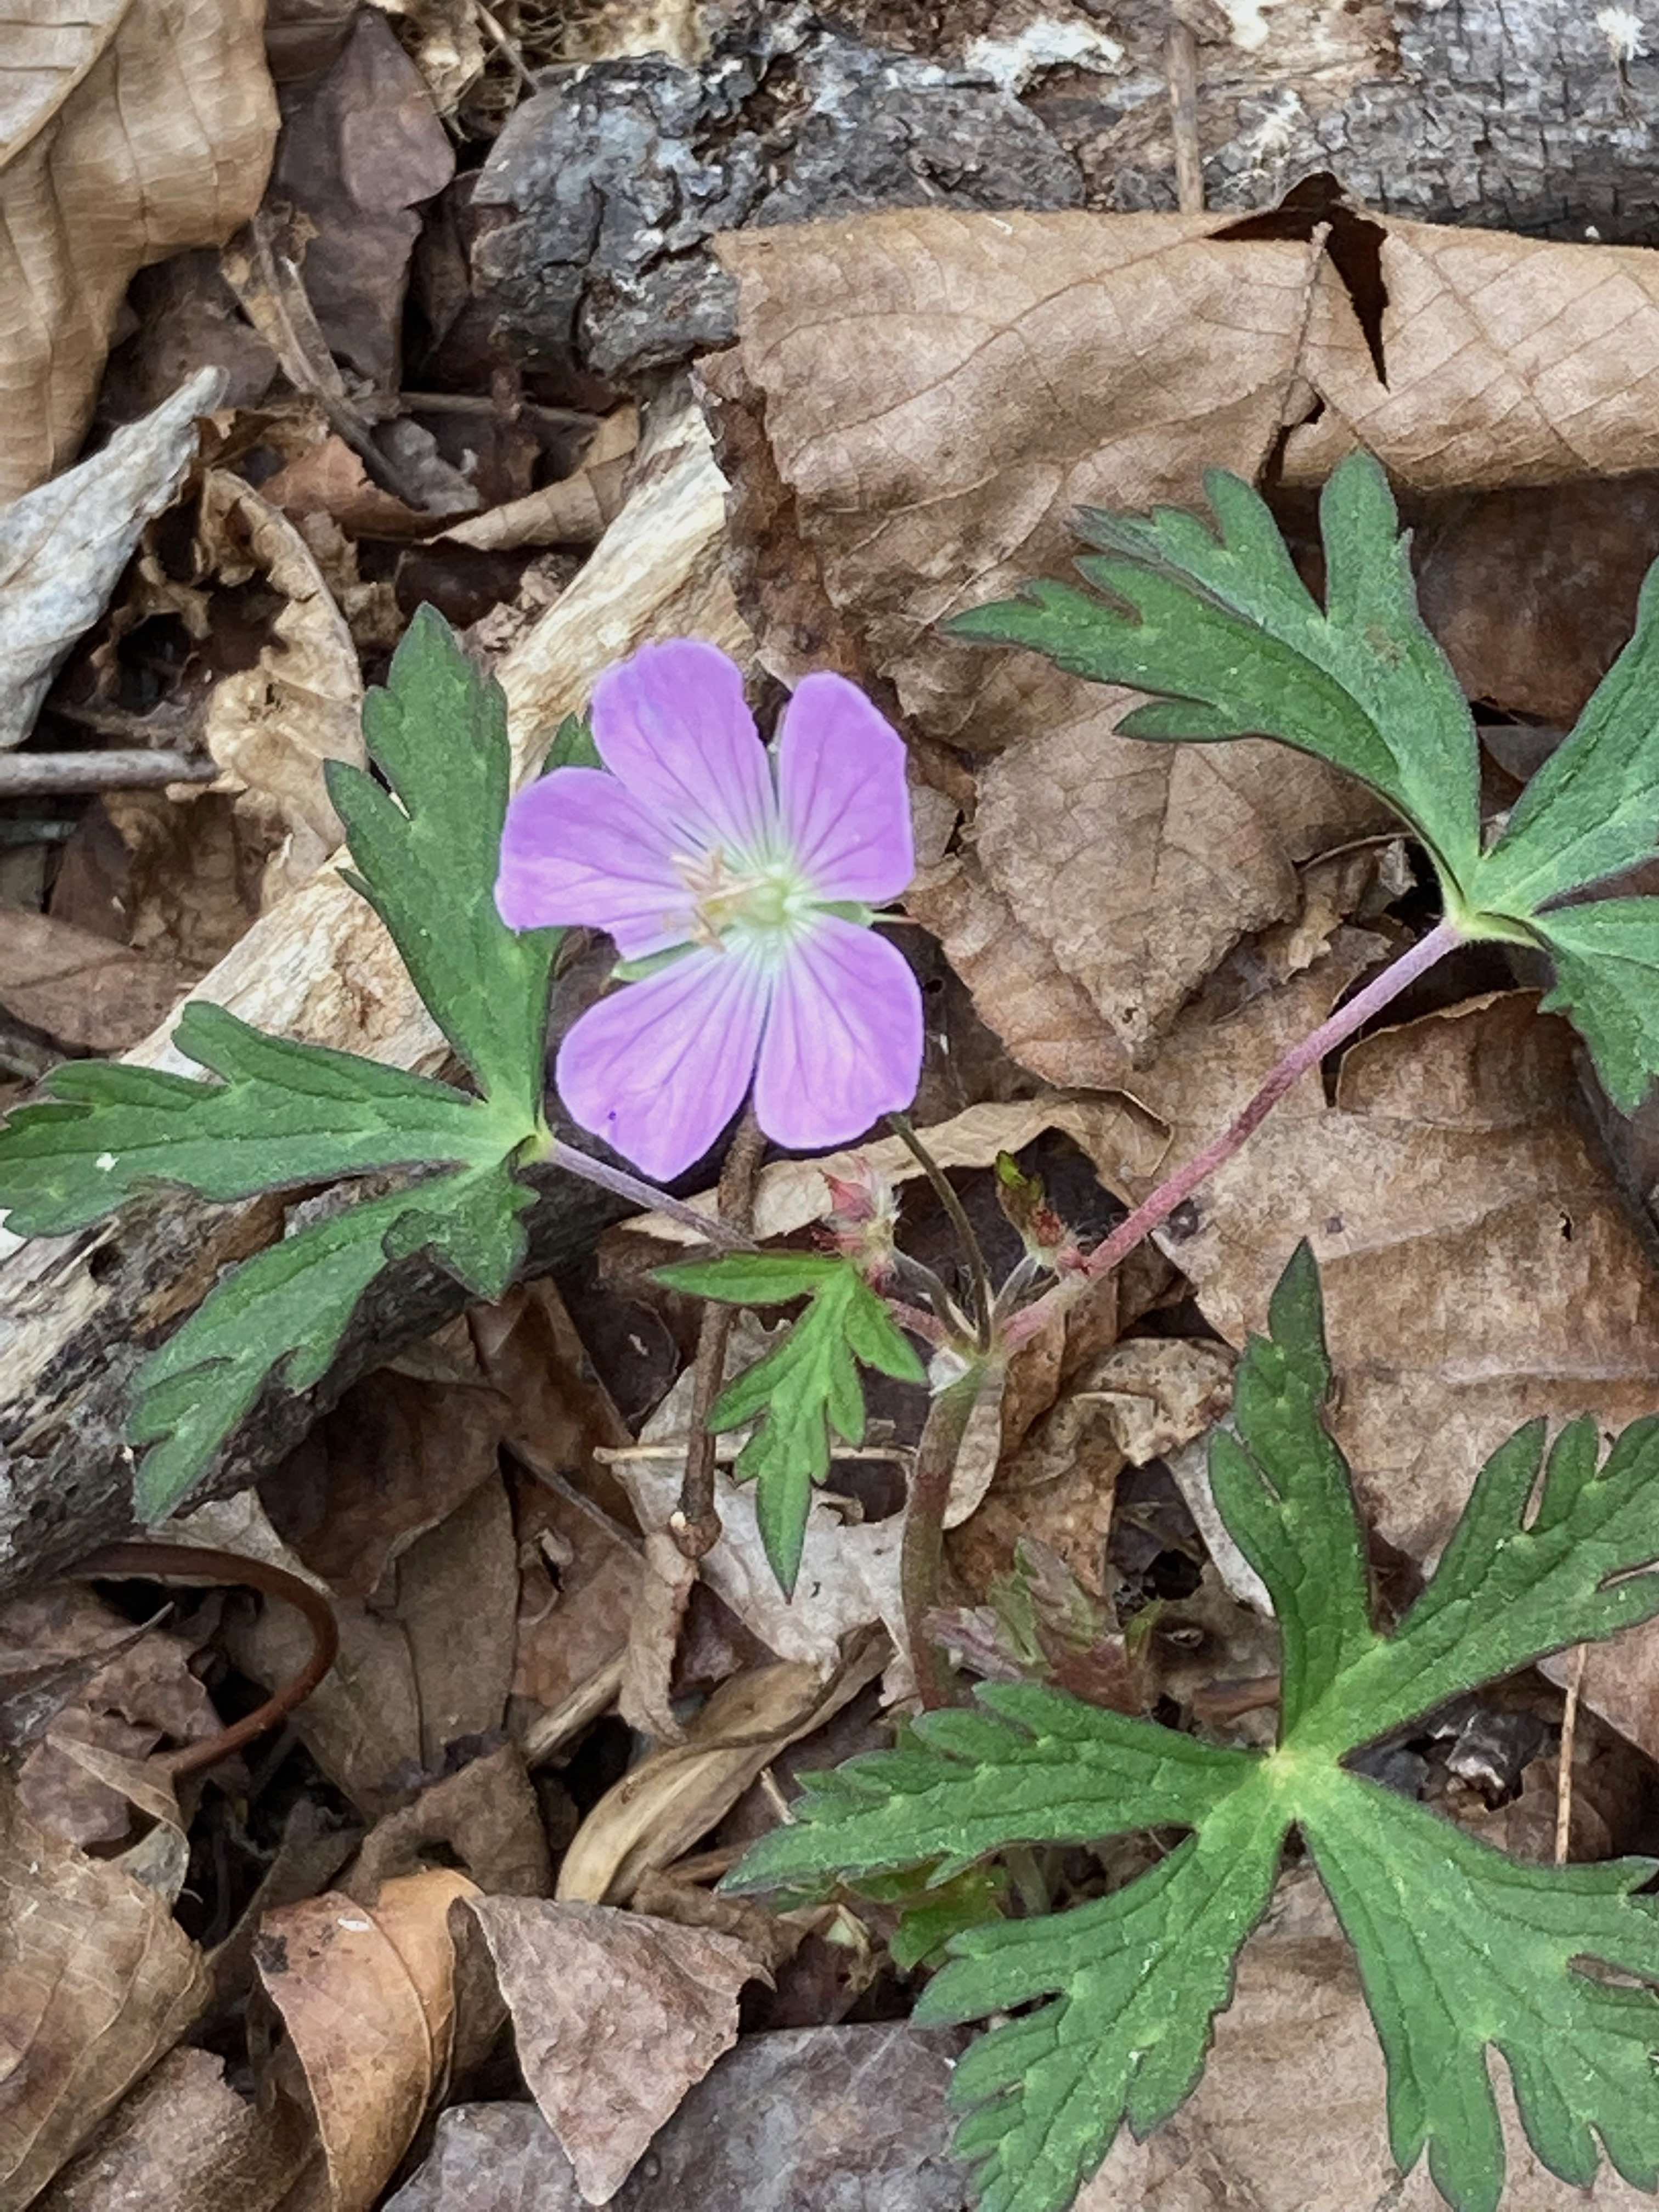 The Scientific Name is Geranium maculatum. You will likely hear them called Wild Geranium, Spotted Crane's-bill. This picture shows the A plant from the Piedmont with lighter pink flowers compared to the deeper colored specimens in the mountains. of Geranium maculatum